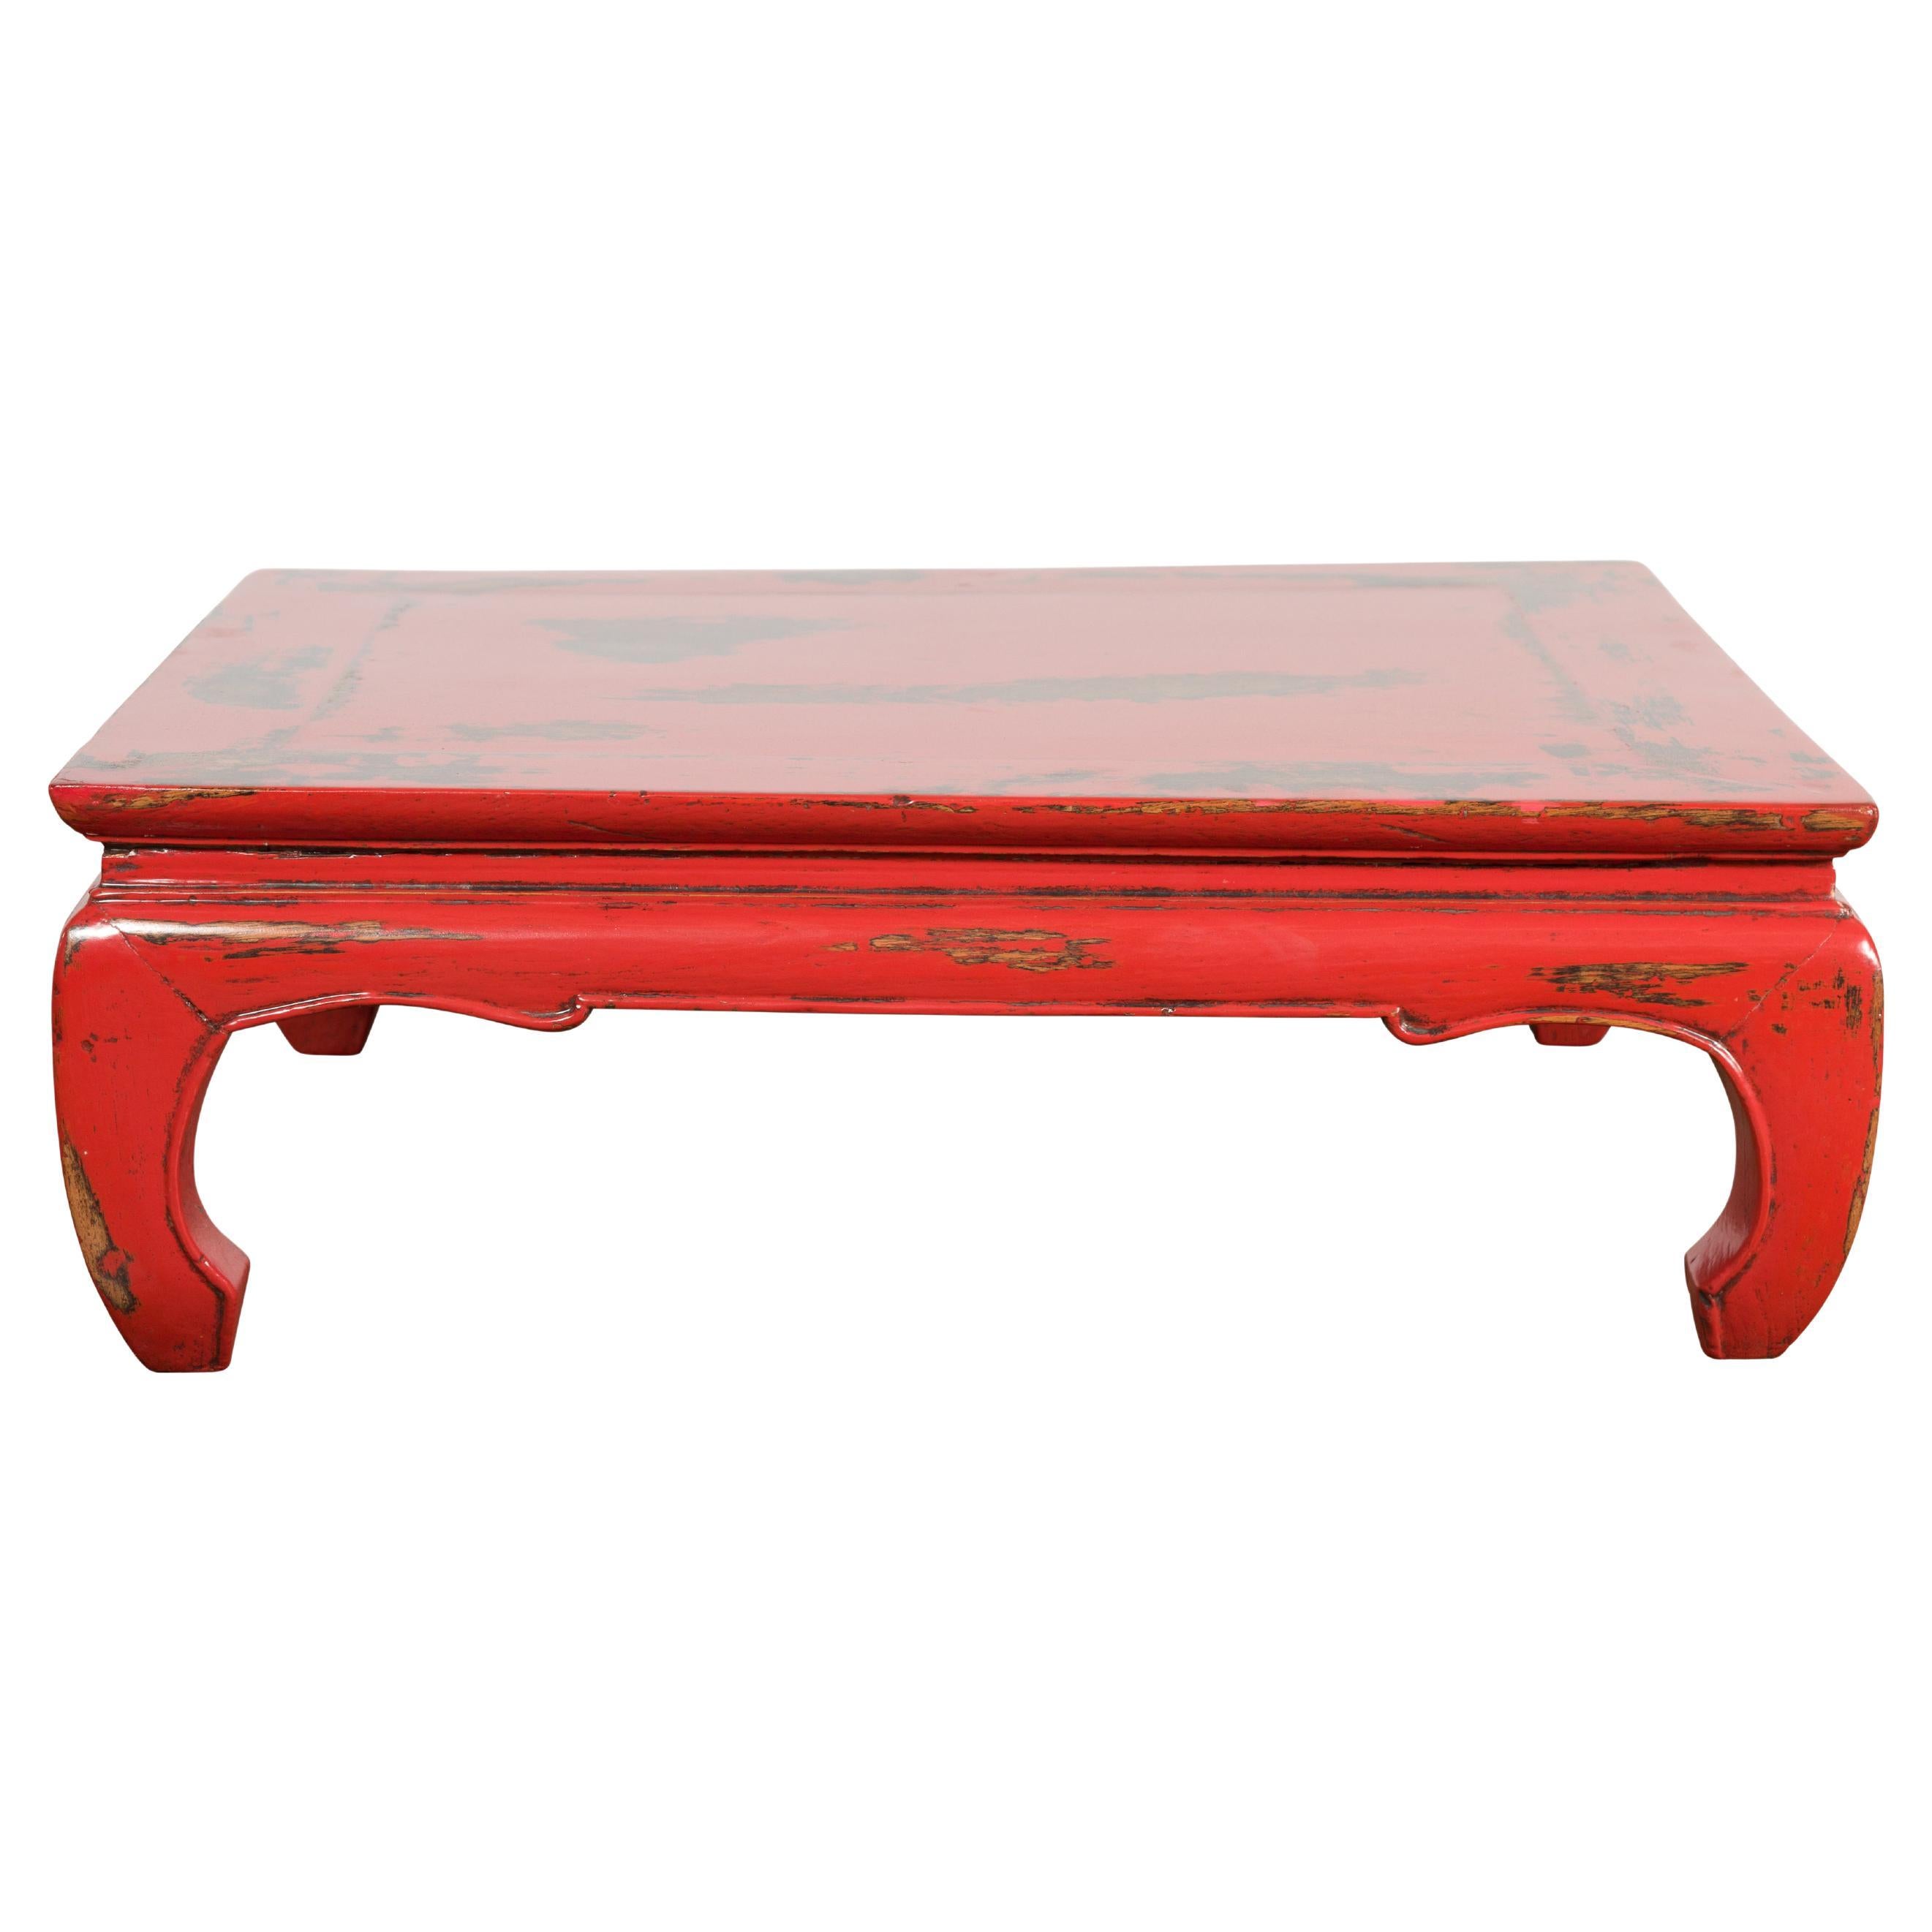 Chinese Qing Dynasty Low Kang Table with Custom Red Distressed Lacquer